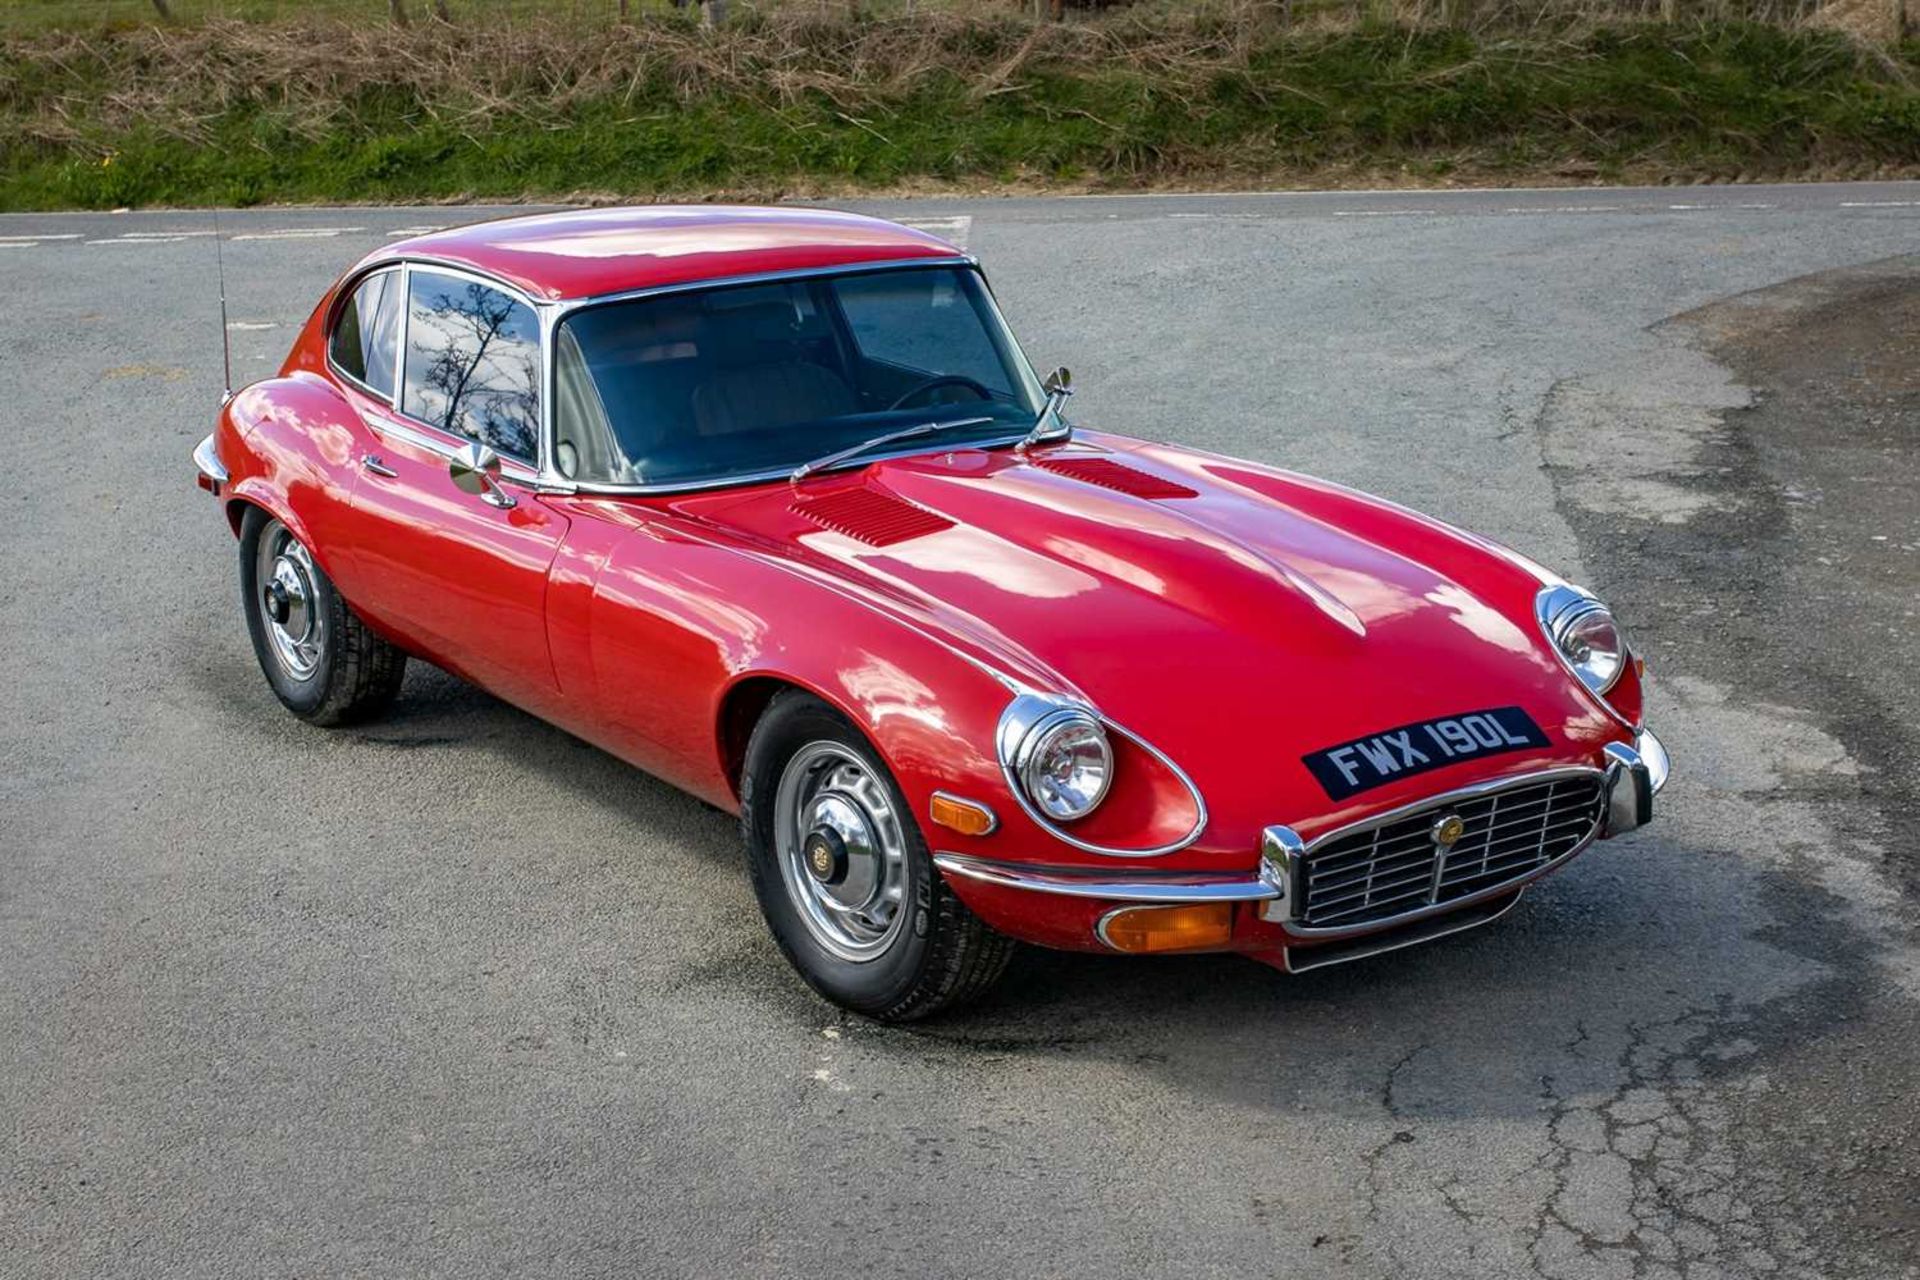 1973 Jaguar E-Type Coupe 5.3 V12 Three owners from new - Image 10 of 79